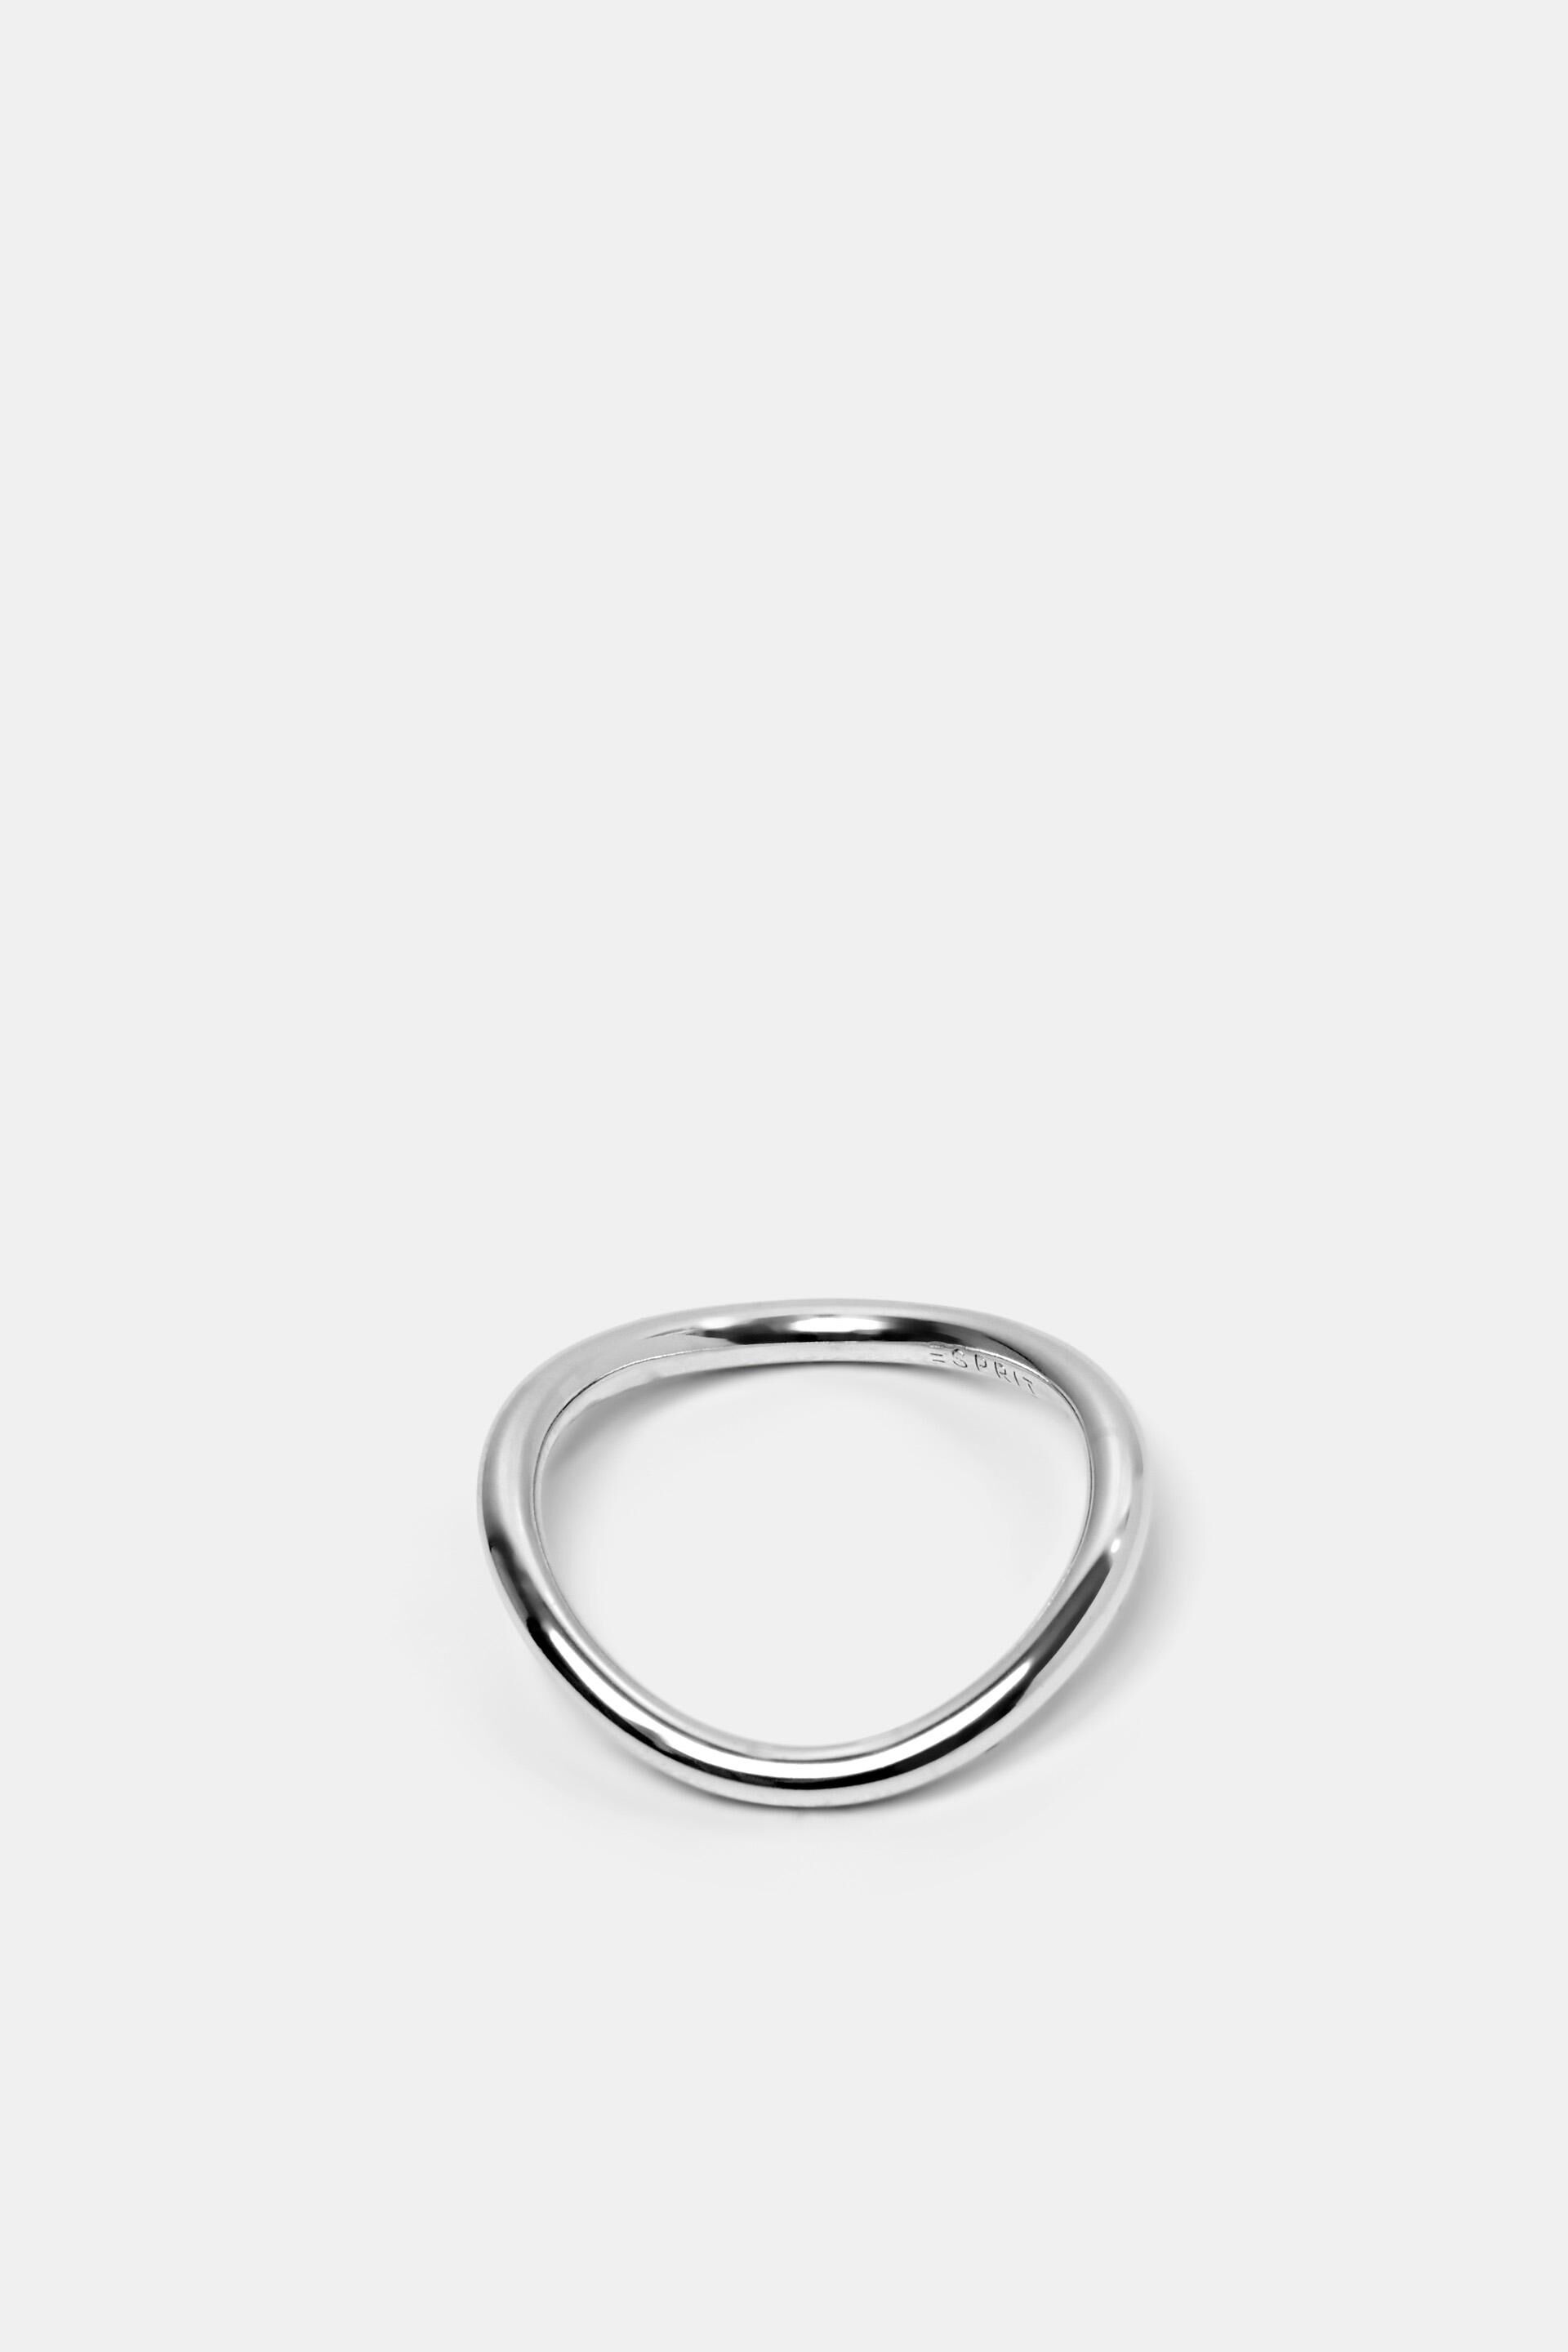 Esprit Silver Ring Wavy Sterling